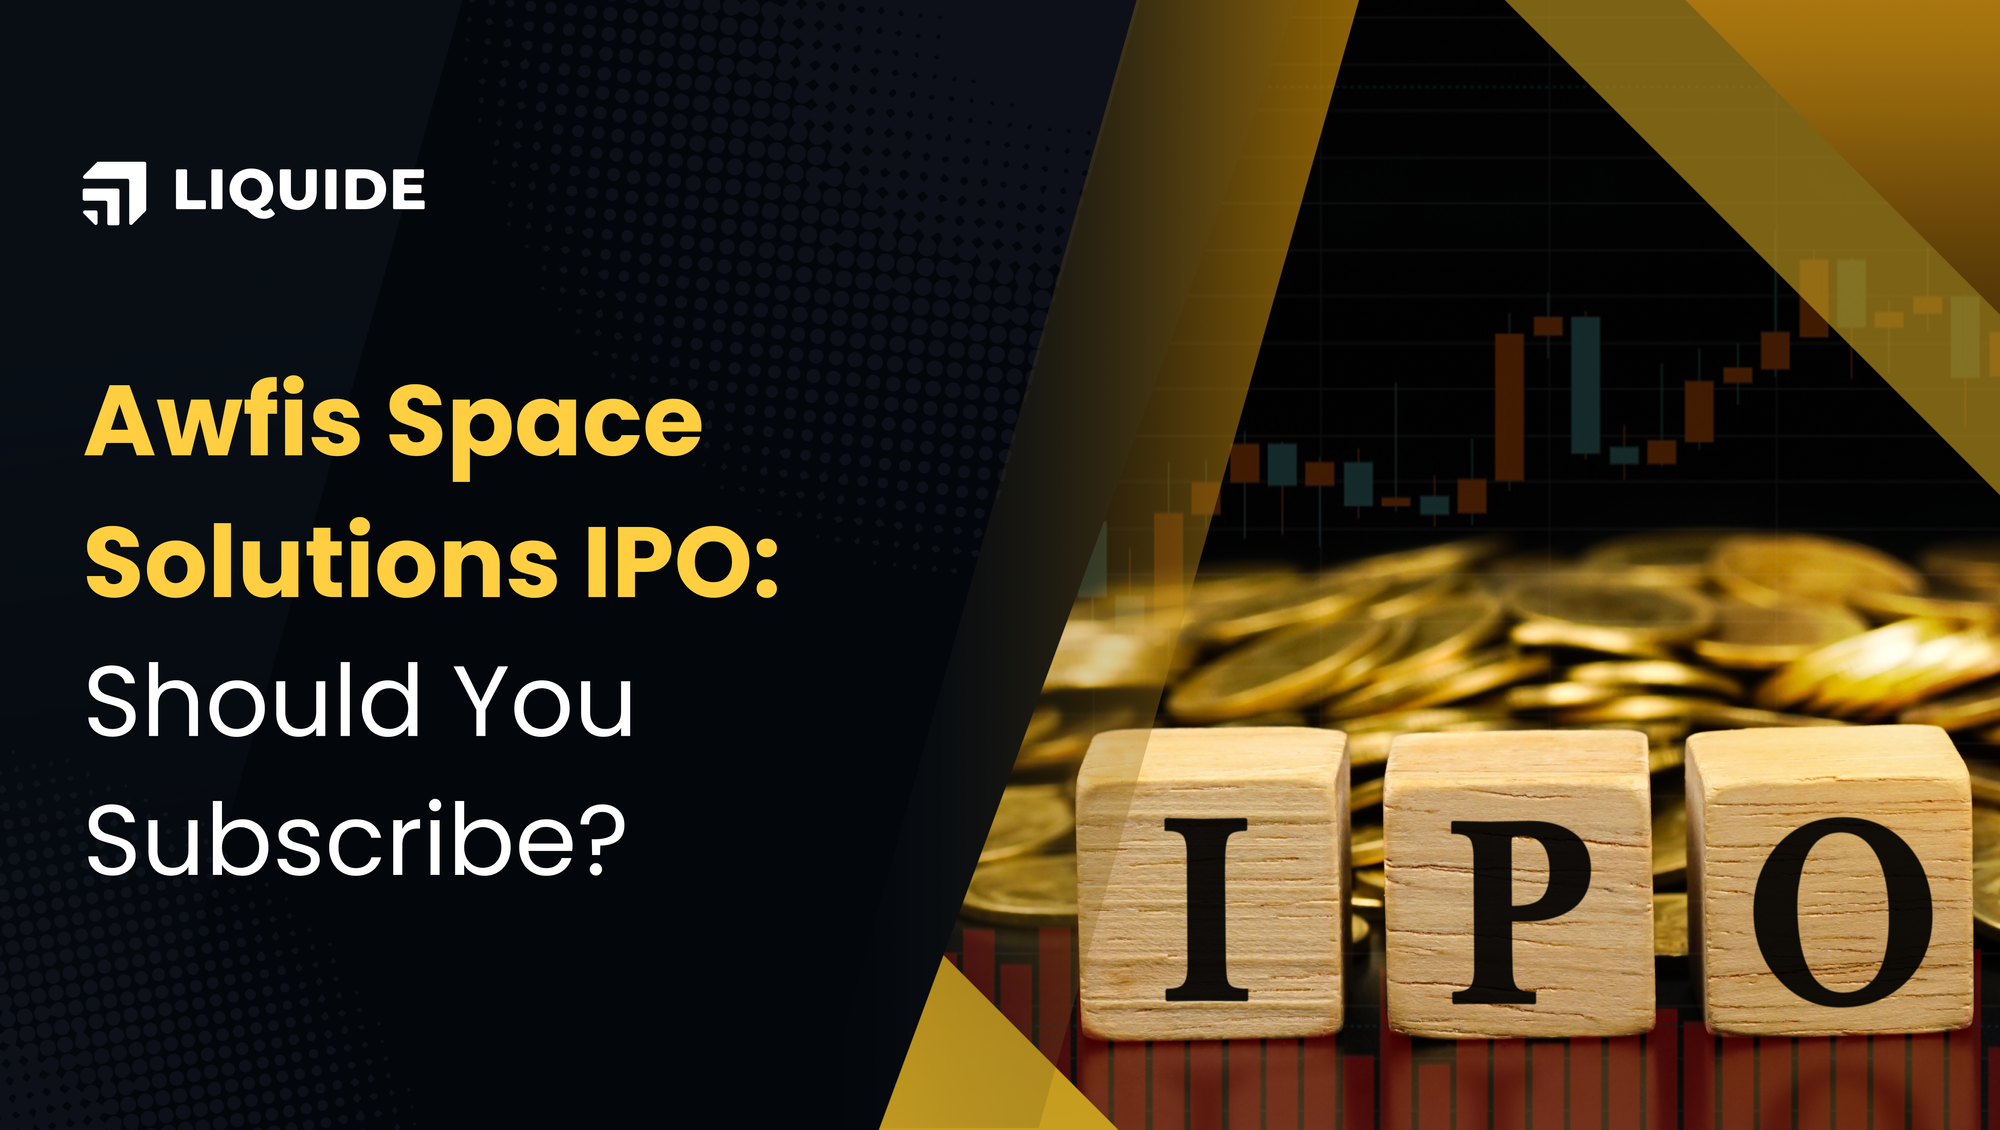 awfis space solutions IPO, recent IPO, latest IPO news, nse, bse, sebi, limo, liquide